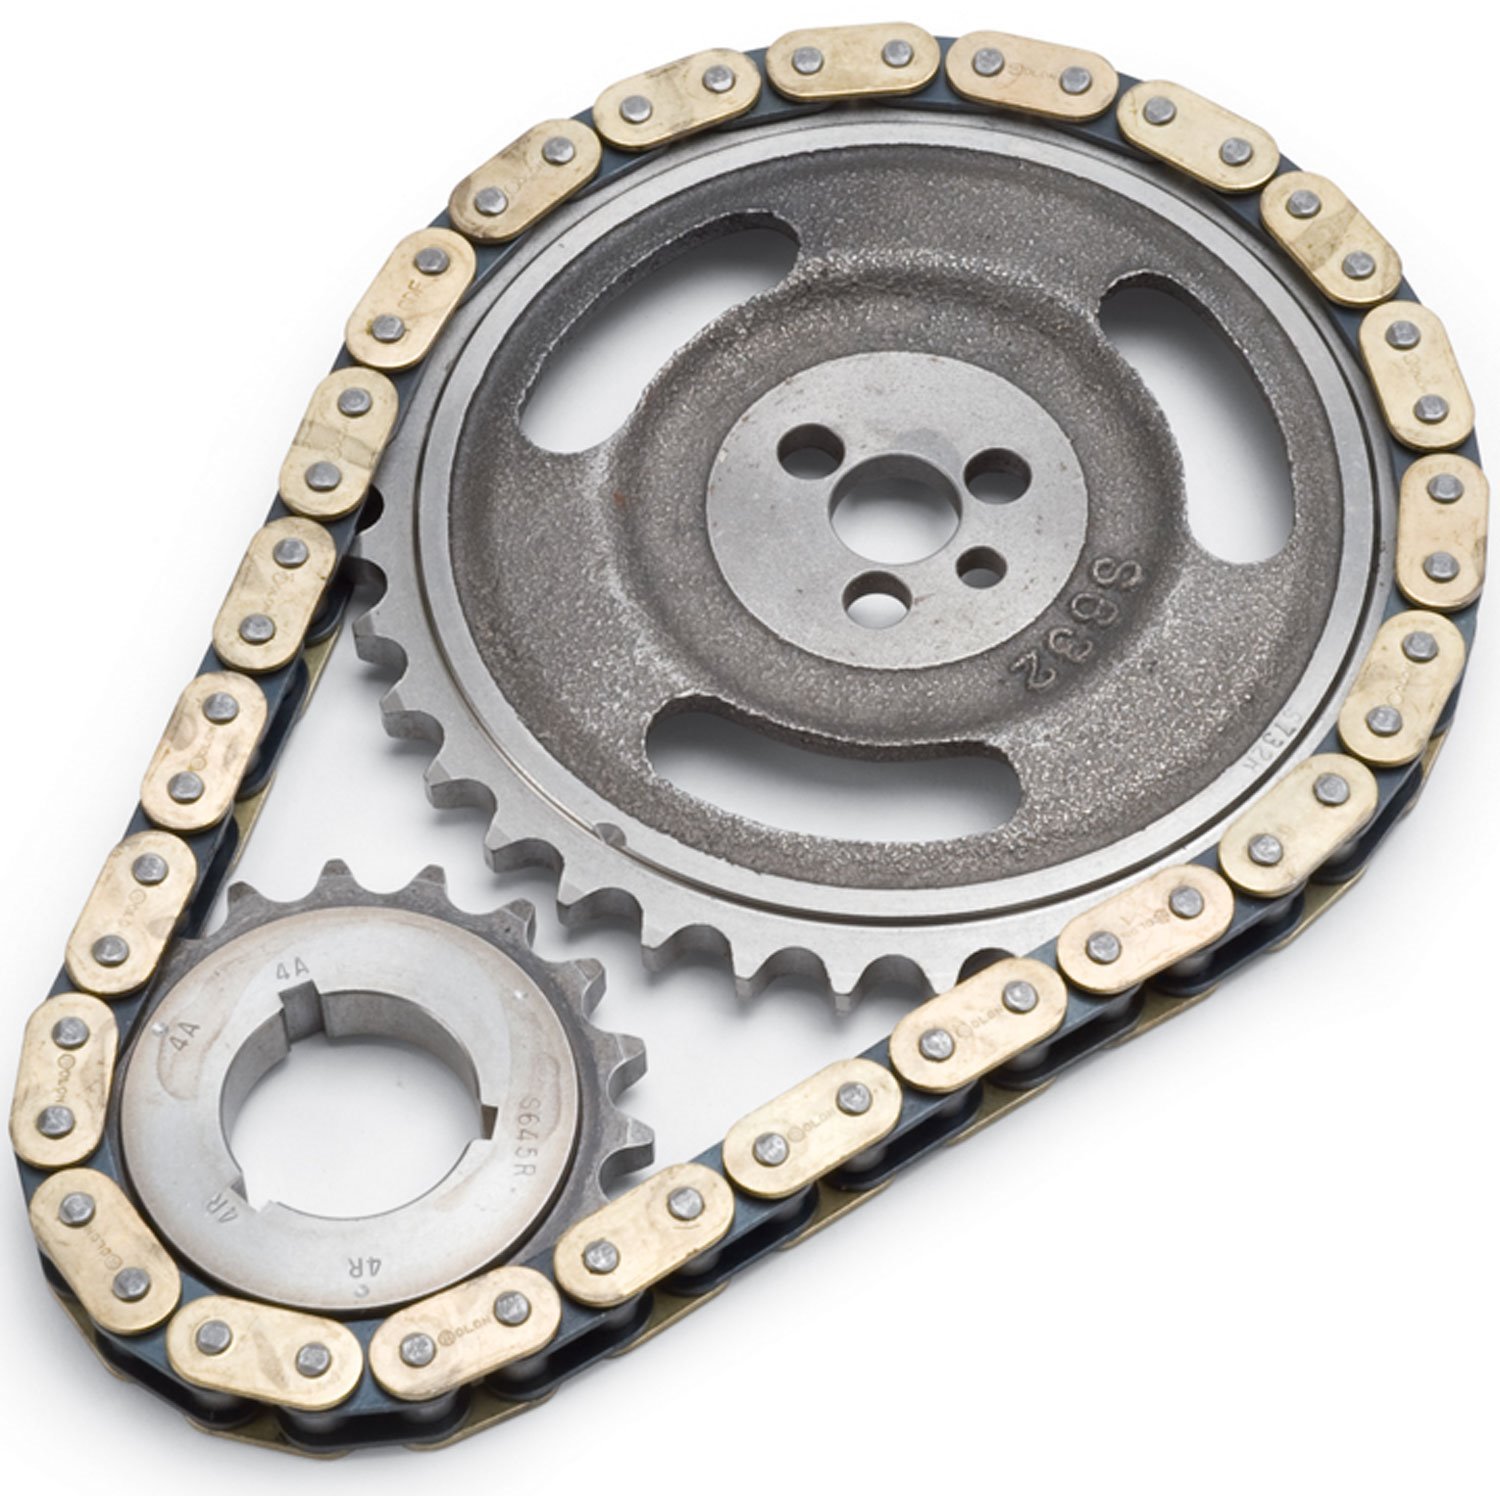 Performer-Link Timing Chain Set for 1987-1995 Small Block